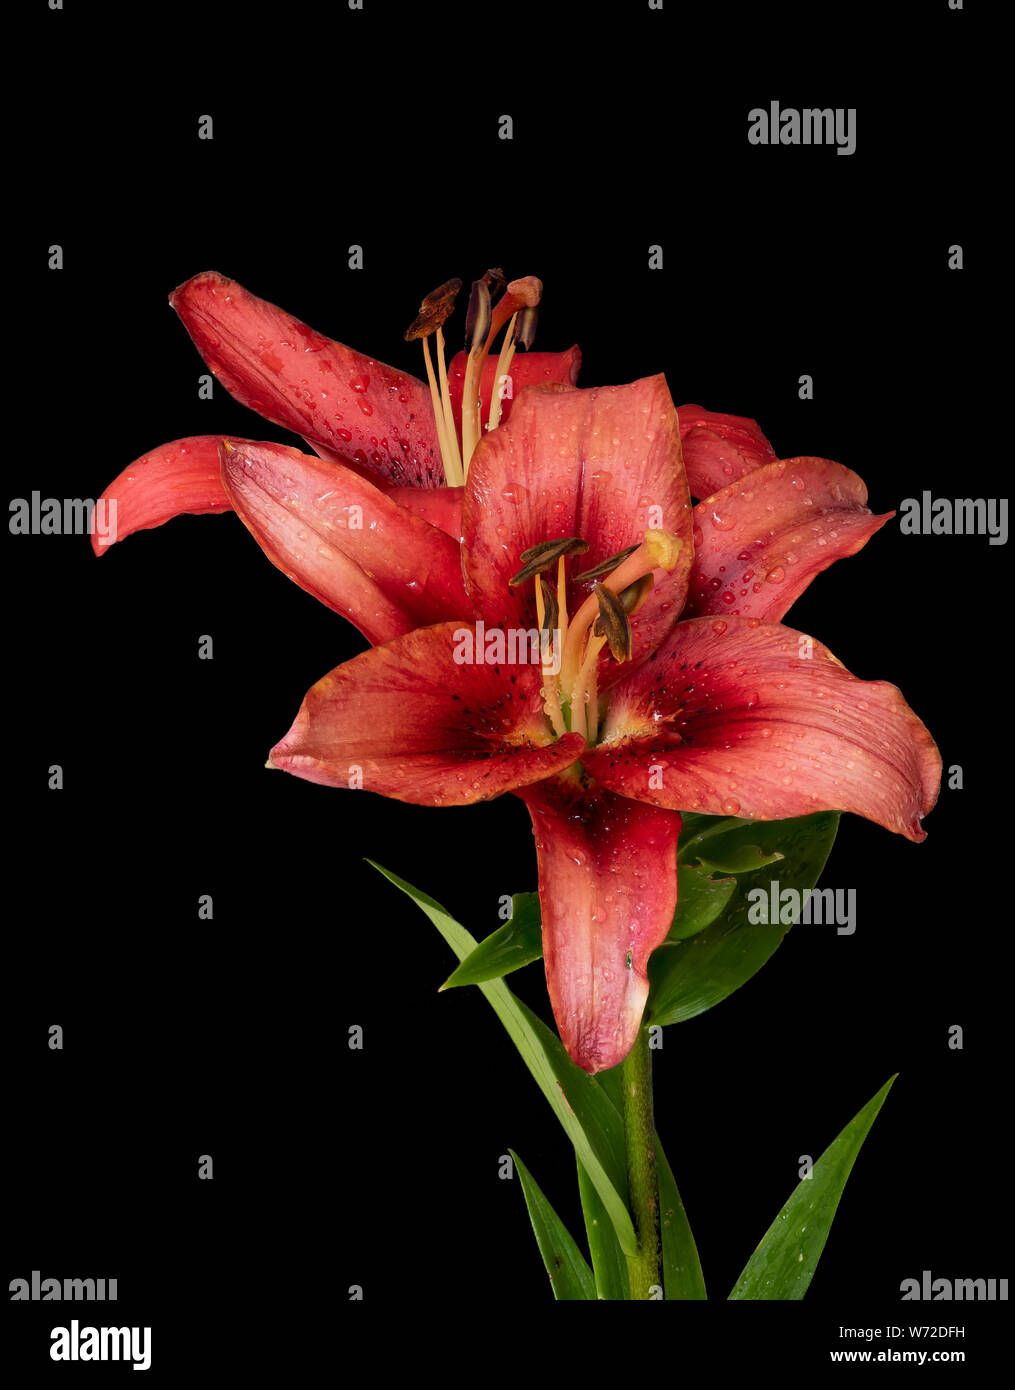 Two close red lily blossoms with rain droplets macro on black background with detailed texture, stem and green leaves Stock Photo